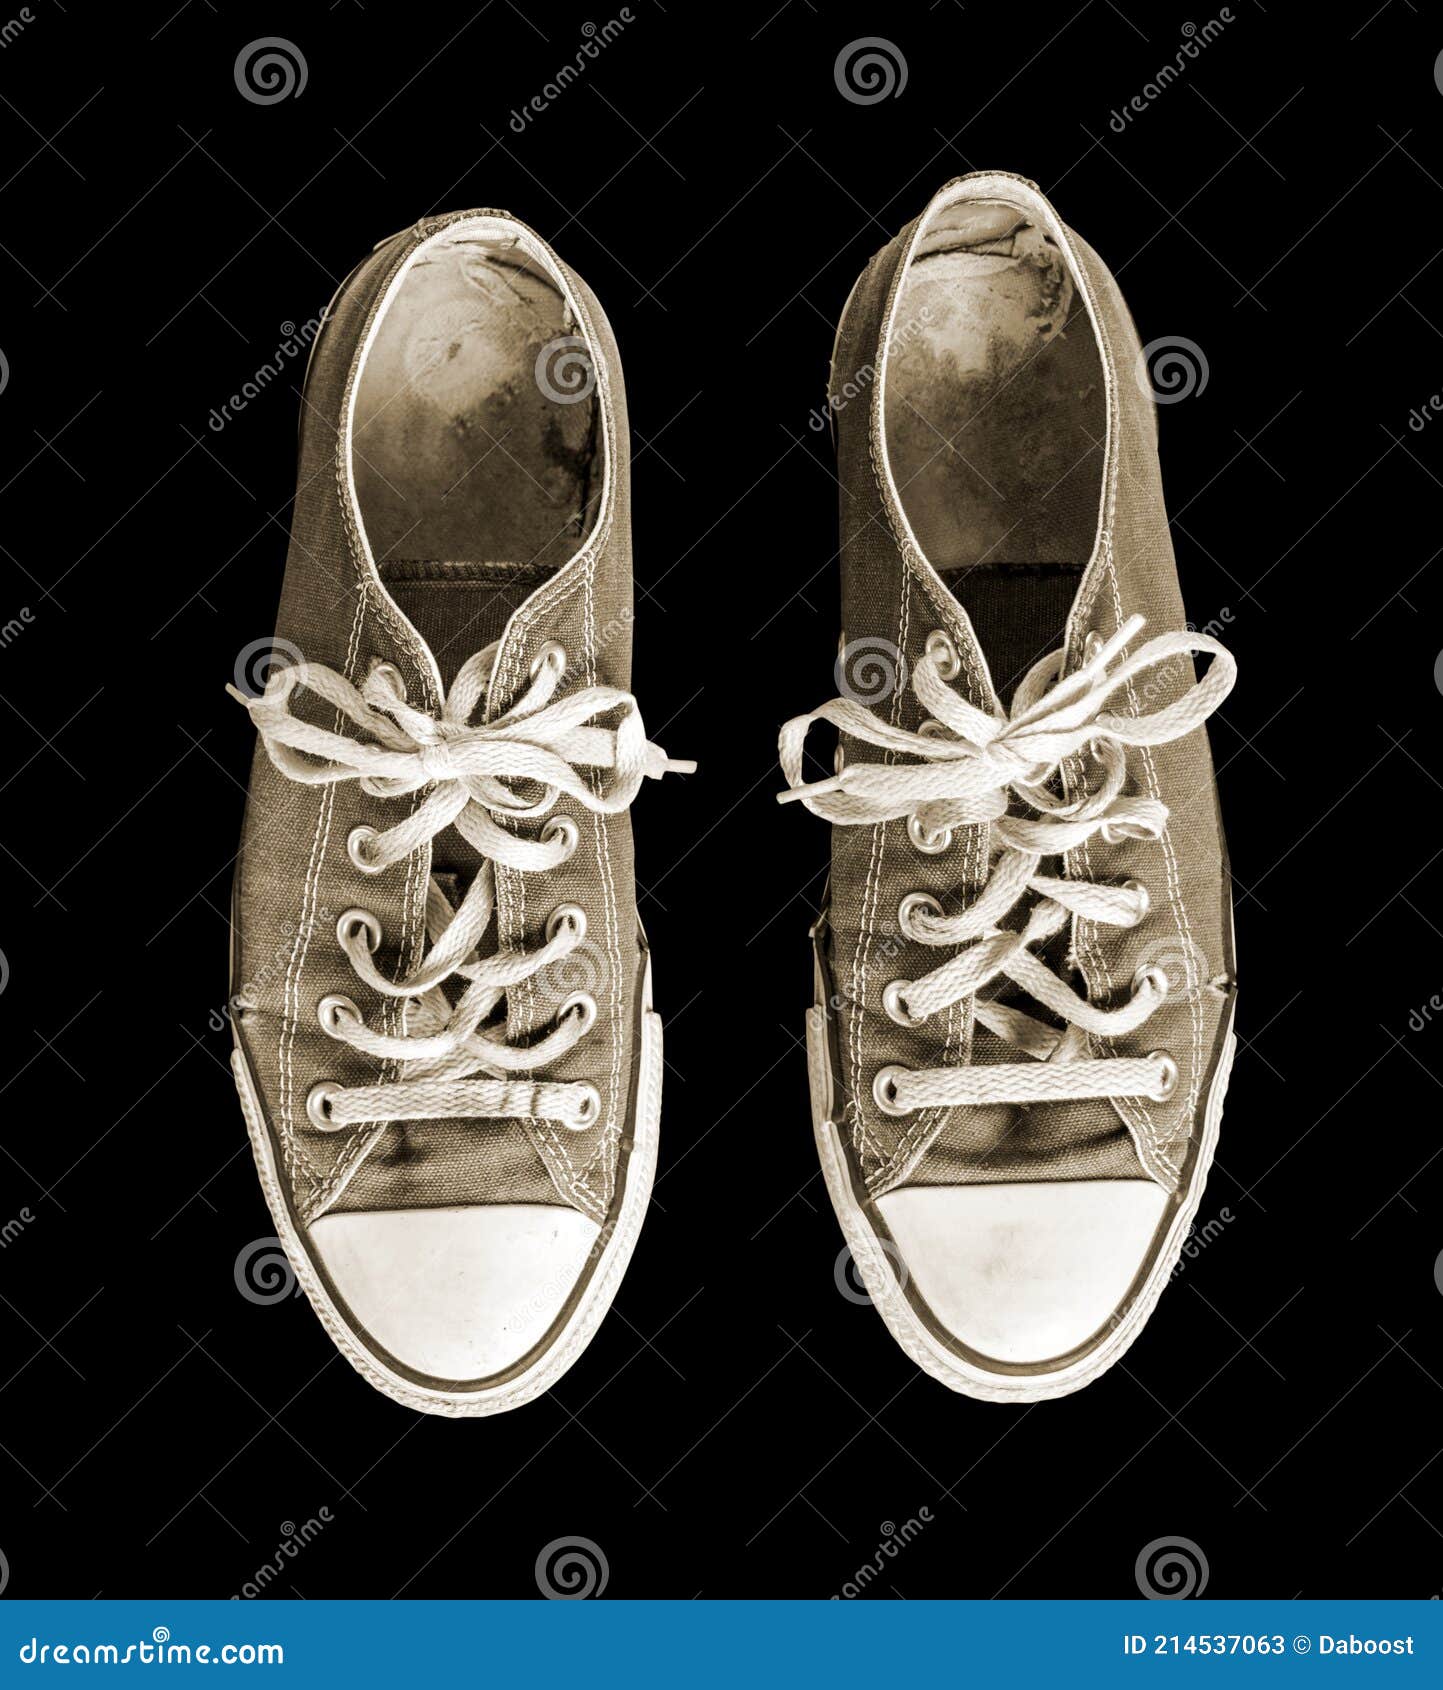 Old Sneakers Isolated on White Background Stock Image - Image of retro ...